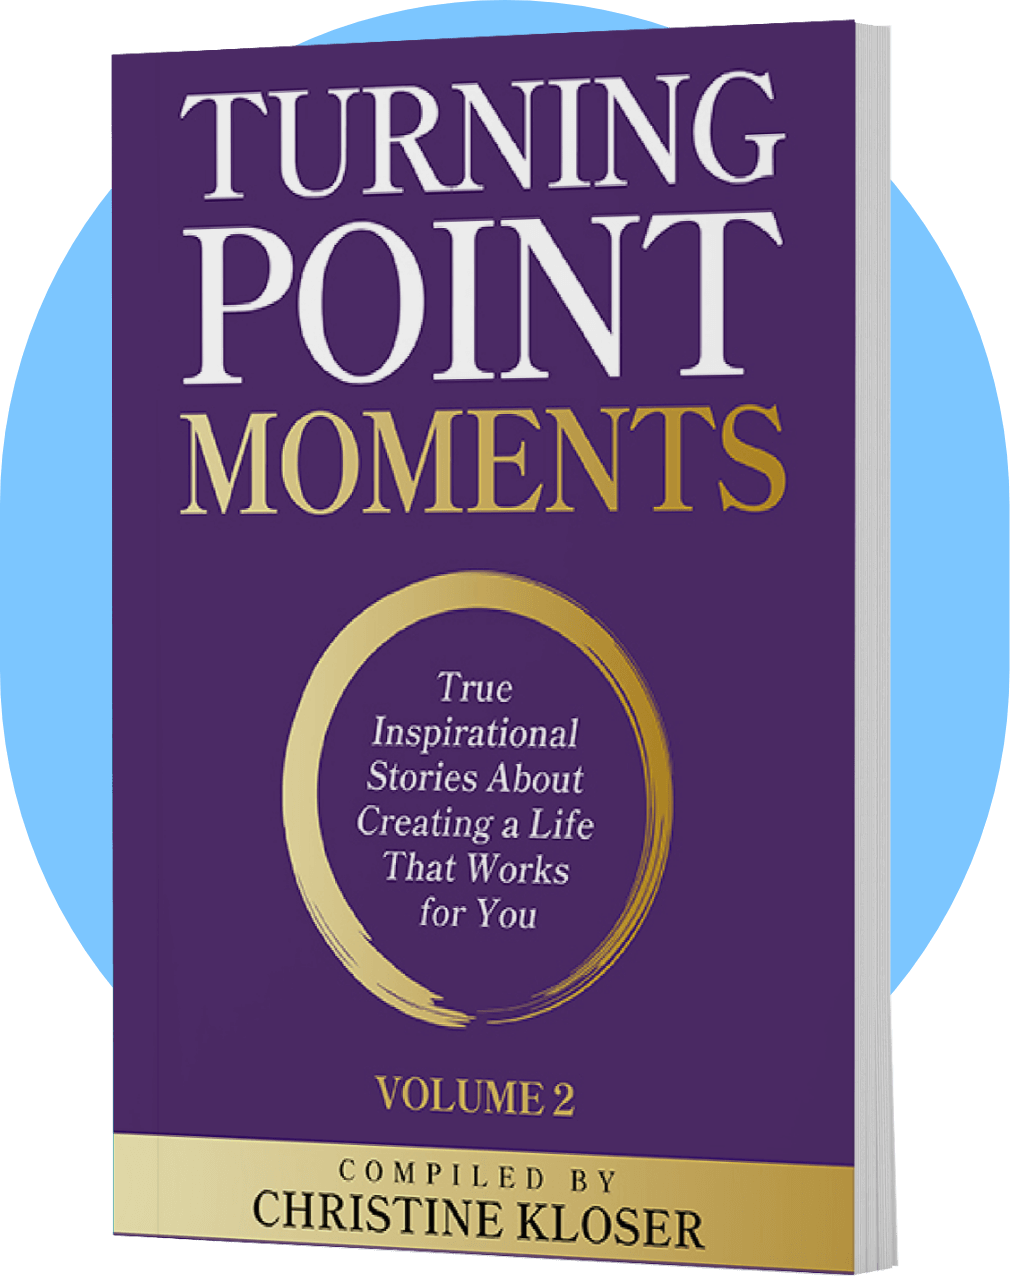 Turning Point Moments: True Inspirational Stories about creating a life that works for you. Volume 2